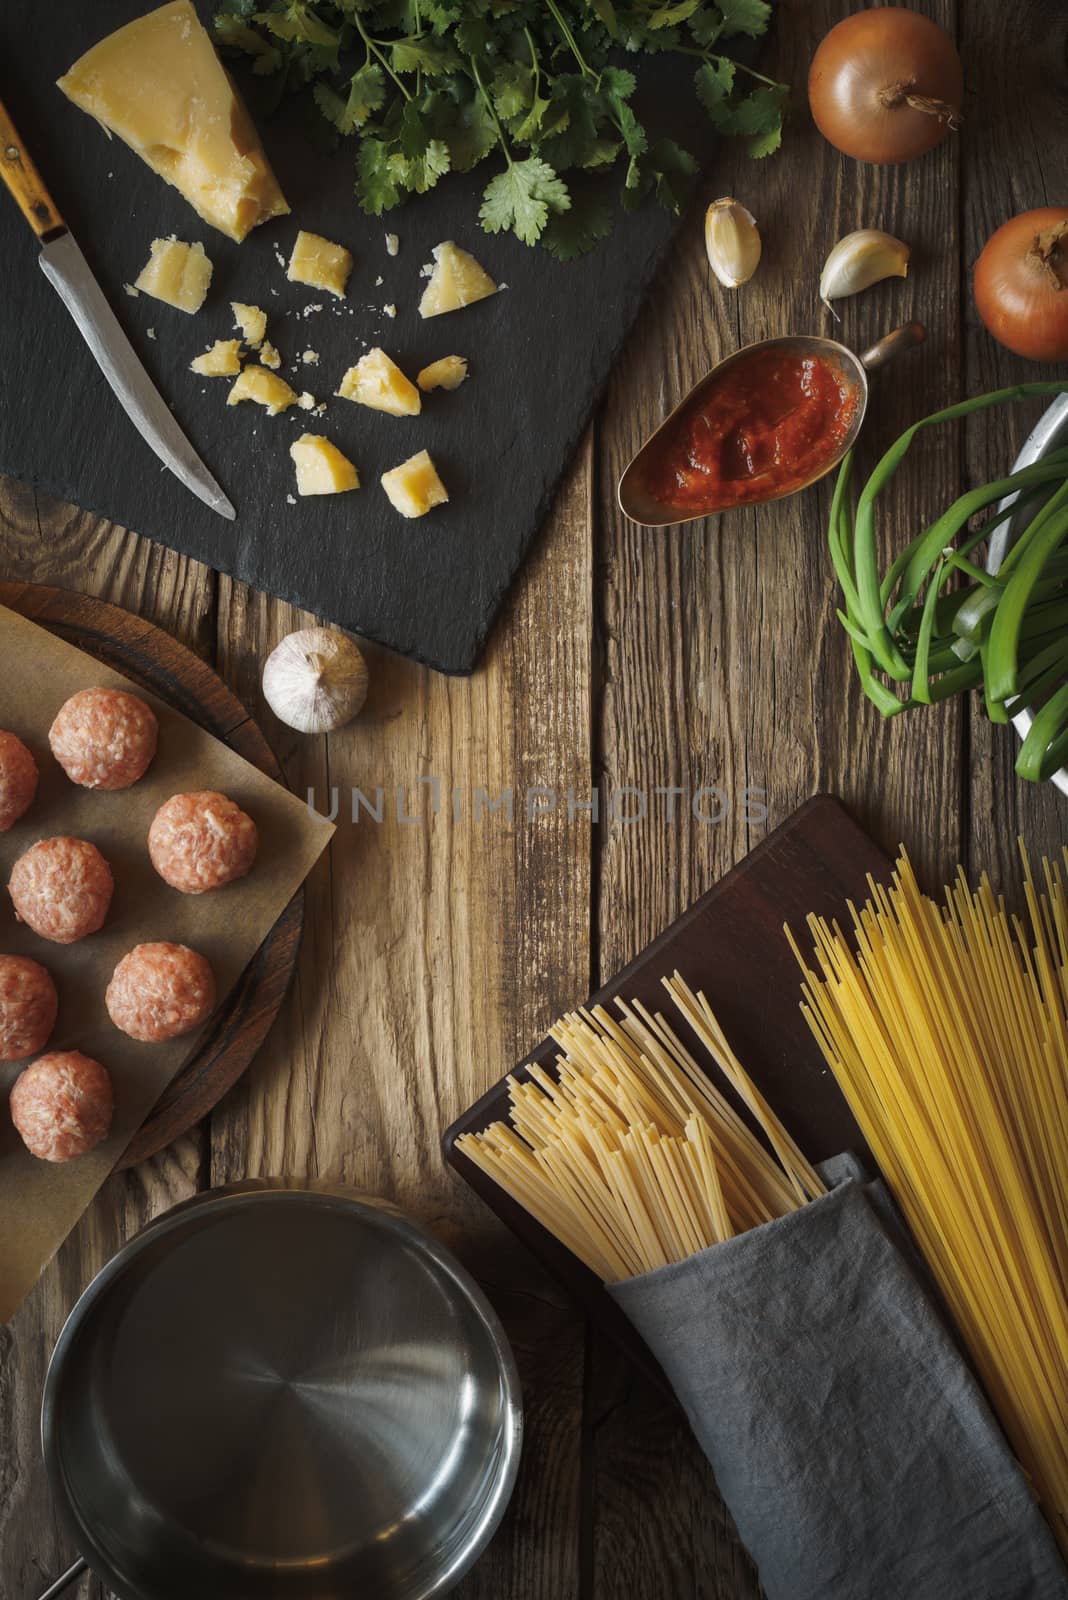 Ingredients for cooking spaghetti, meatballs with cheese and fresh herbs vertical copy space